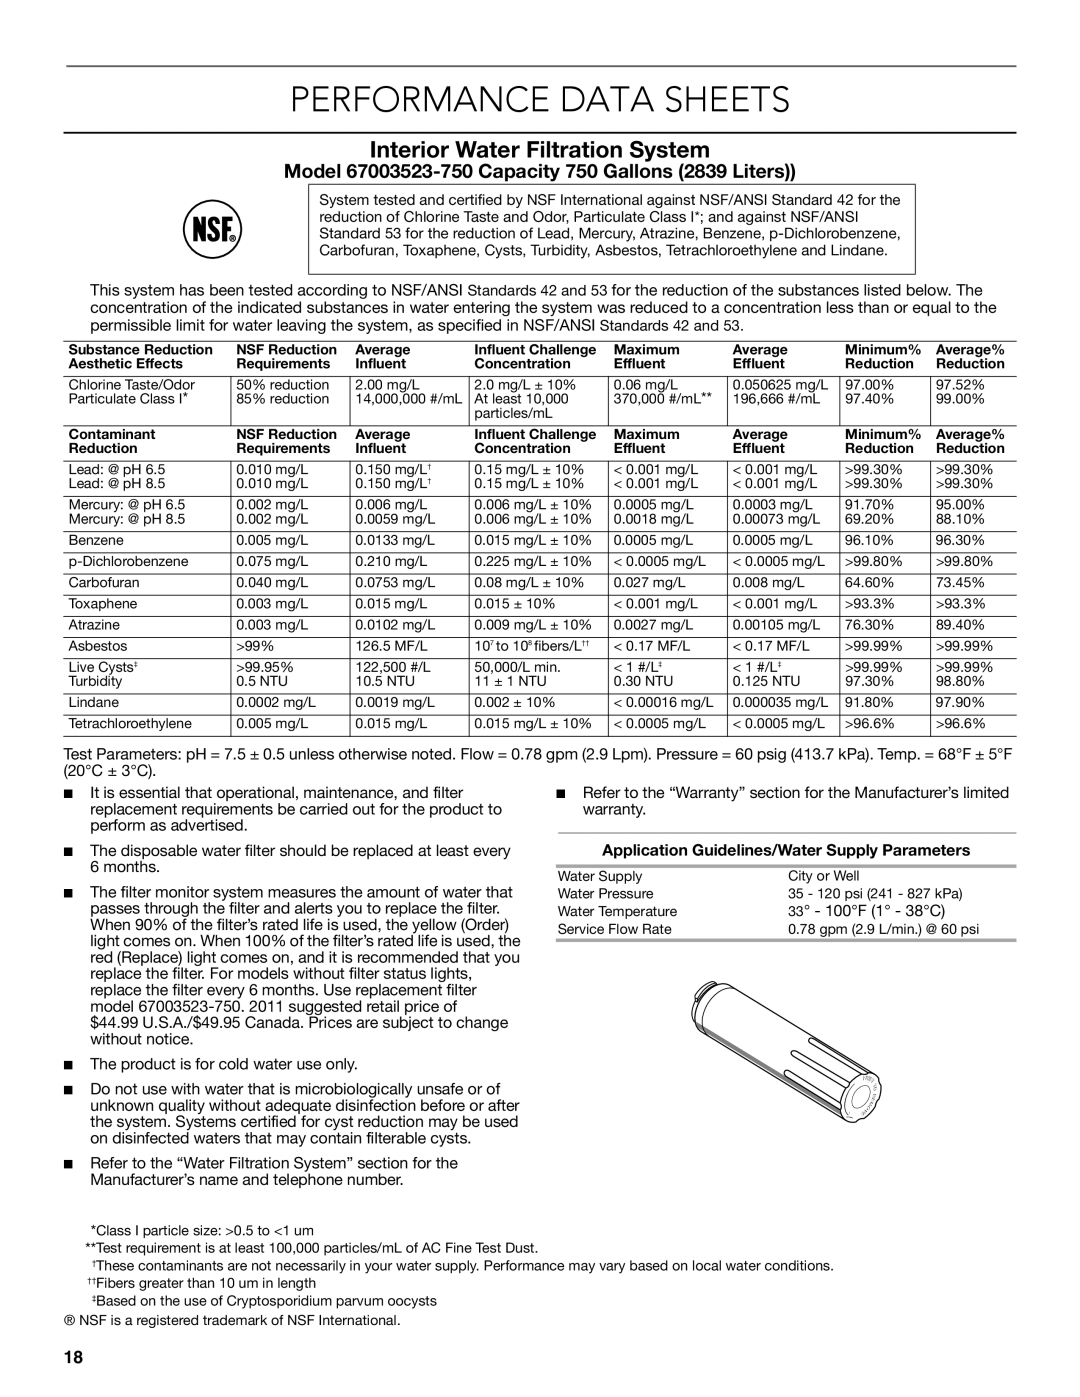 KitchenAid W10635370A installation instructions Performance Data Sheets, Application Guidelines/Water Supply Parameters 